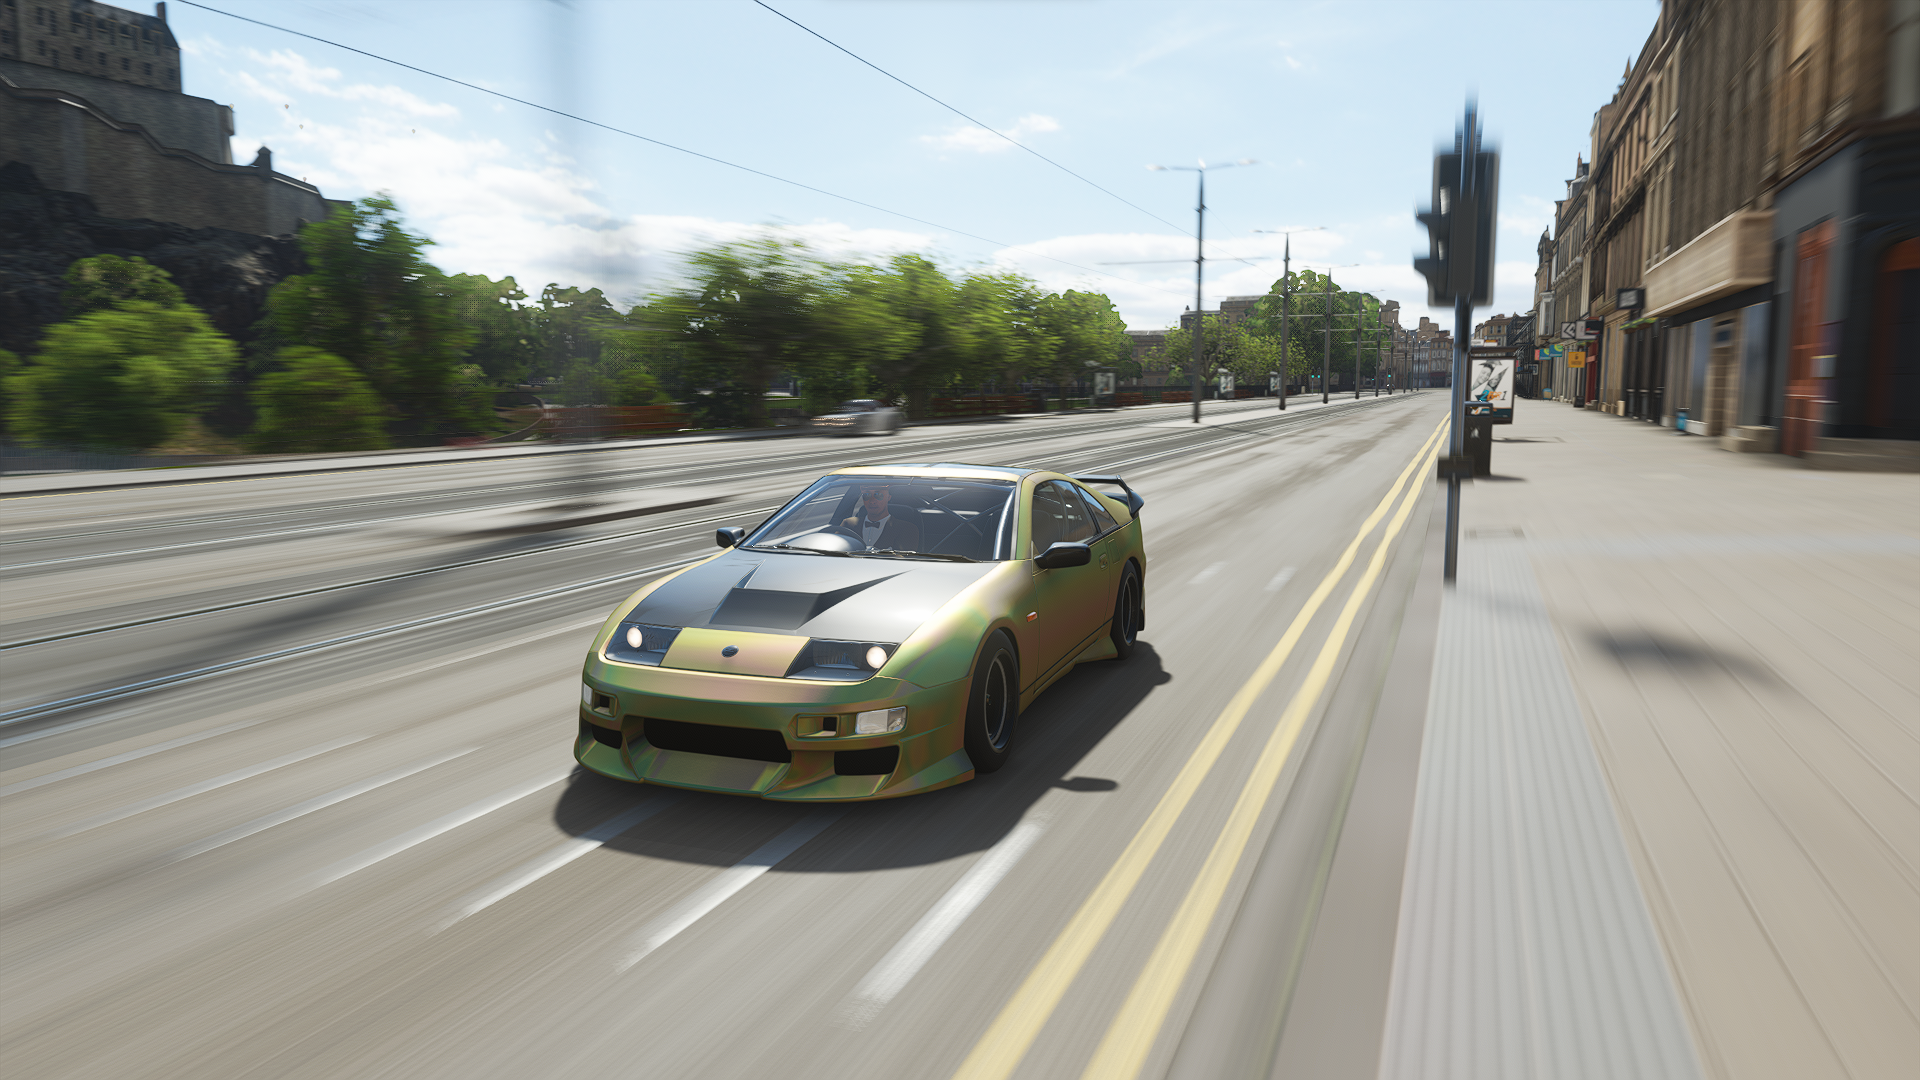 General 1920x1080 Forza Forza Horizon Forza Horizon 4 racing car CGI Nissan 300ZX road video games headlights frontal view trees blurred blurry background sky clouds building Nissan PlaygroundGames Japanese cars